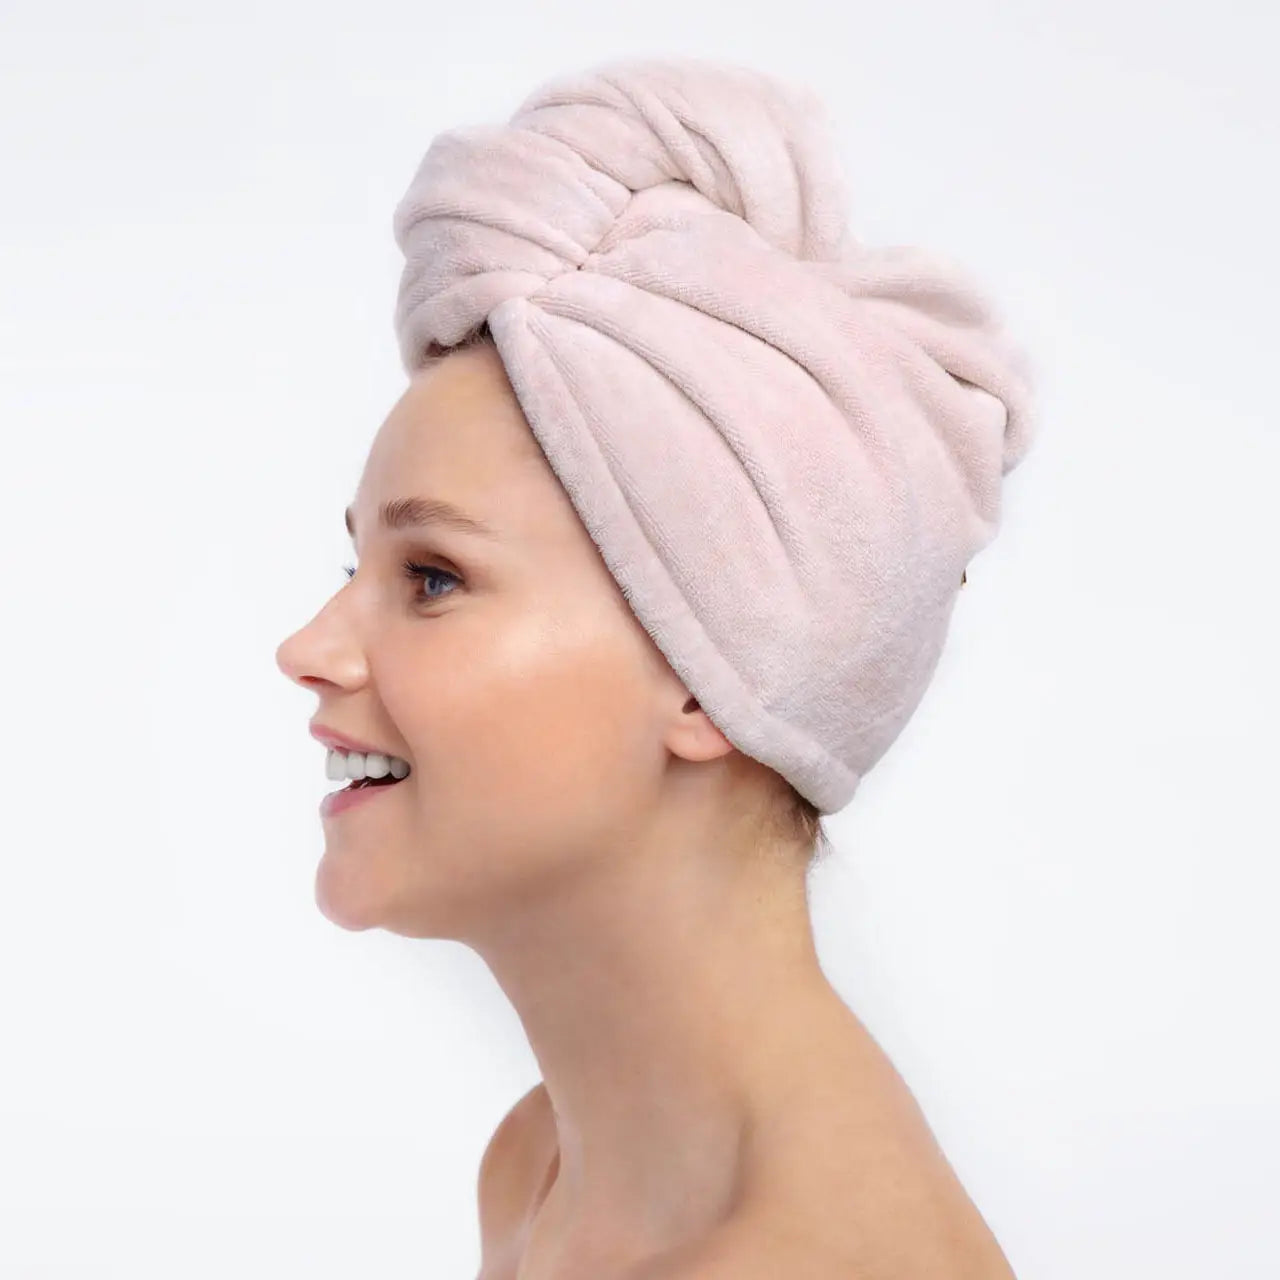 KITSCH - Quick Dry Hair Towel - 2 Colors!